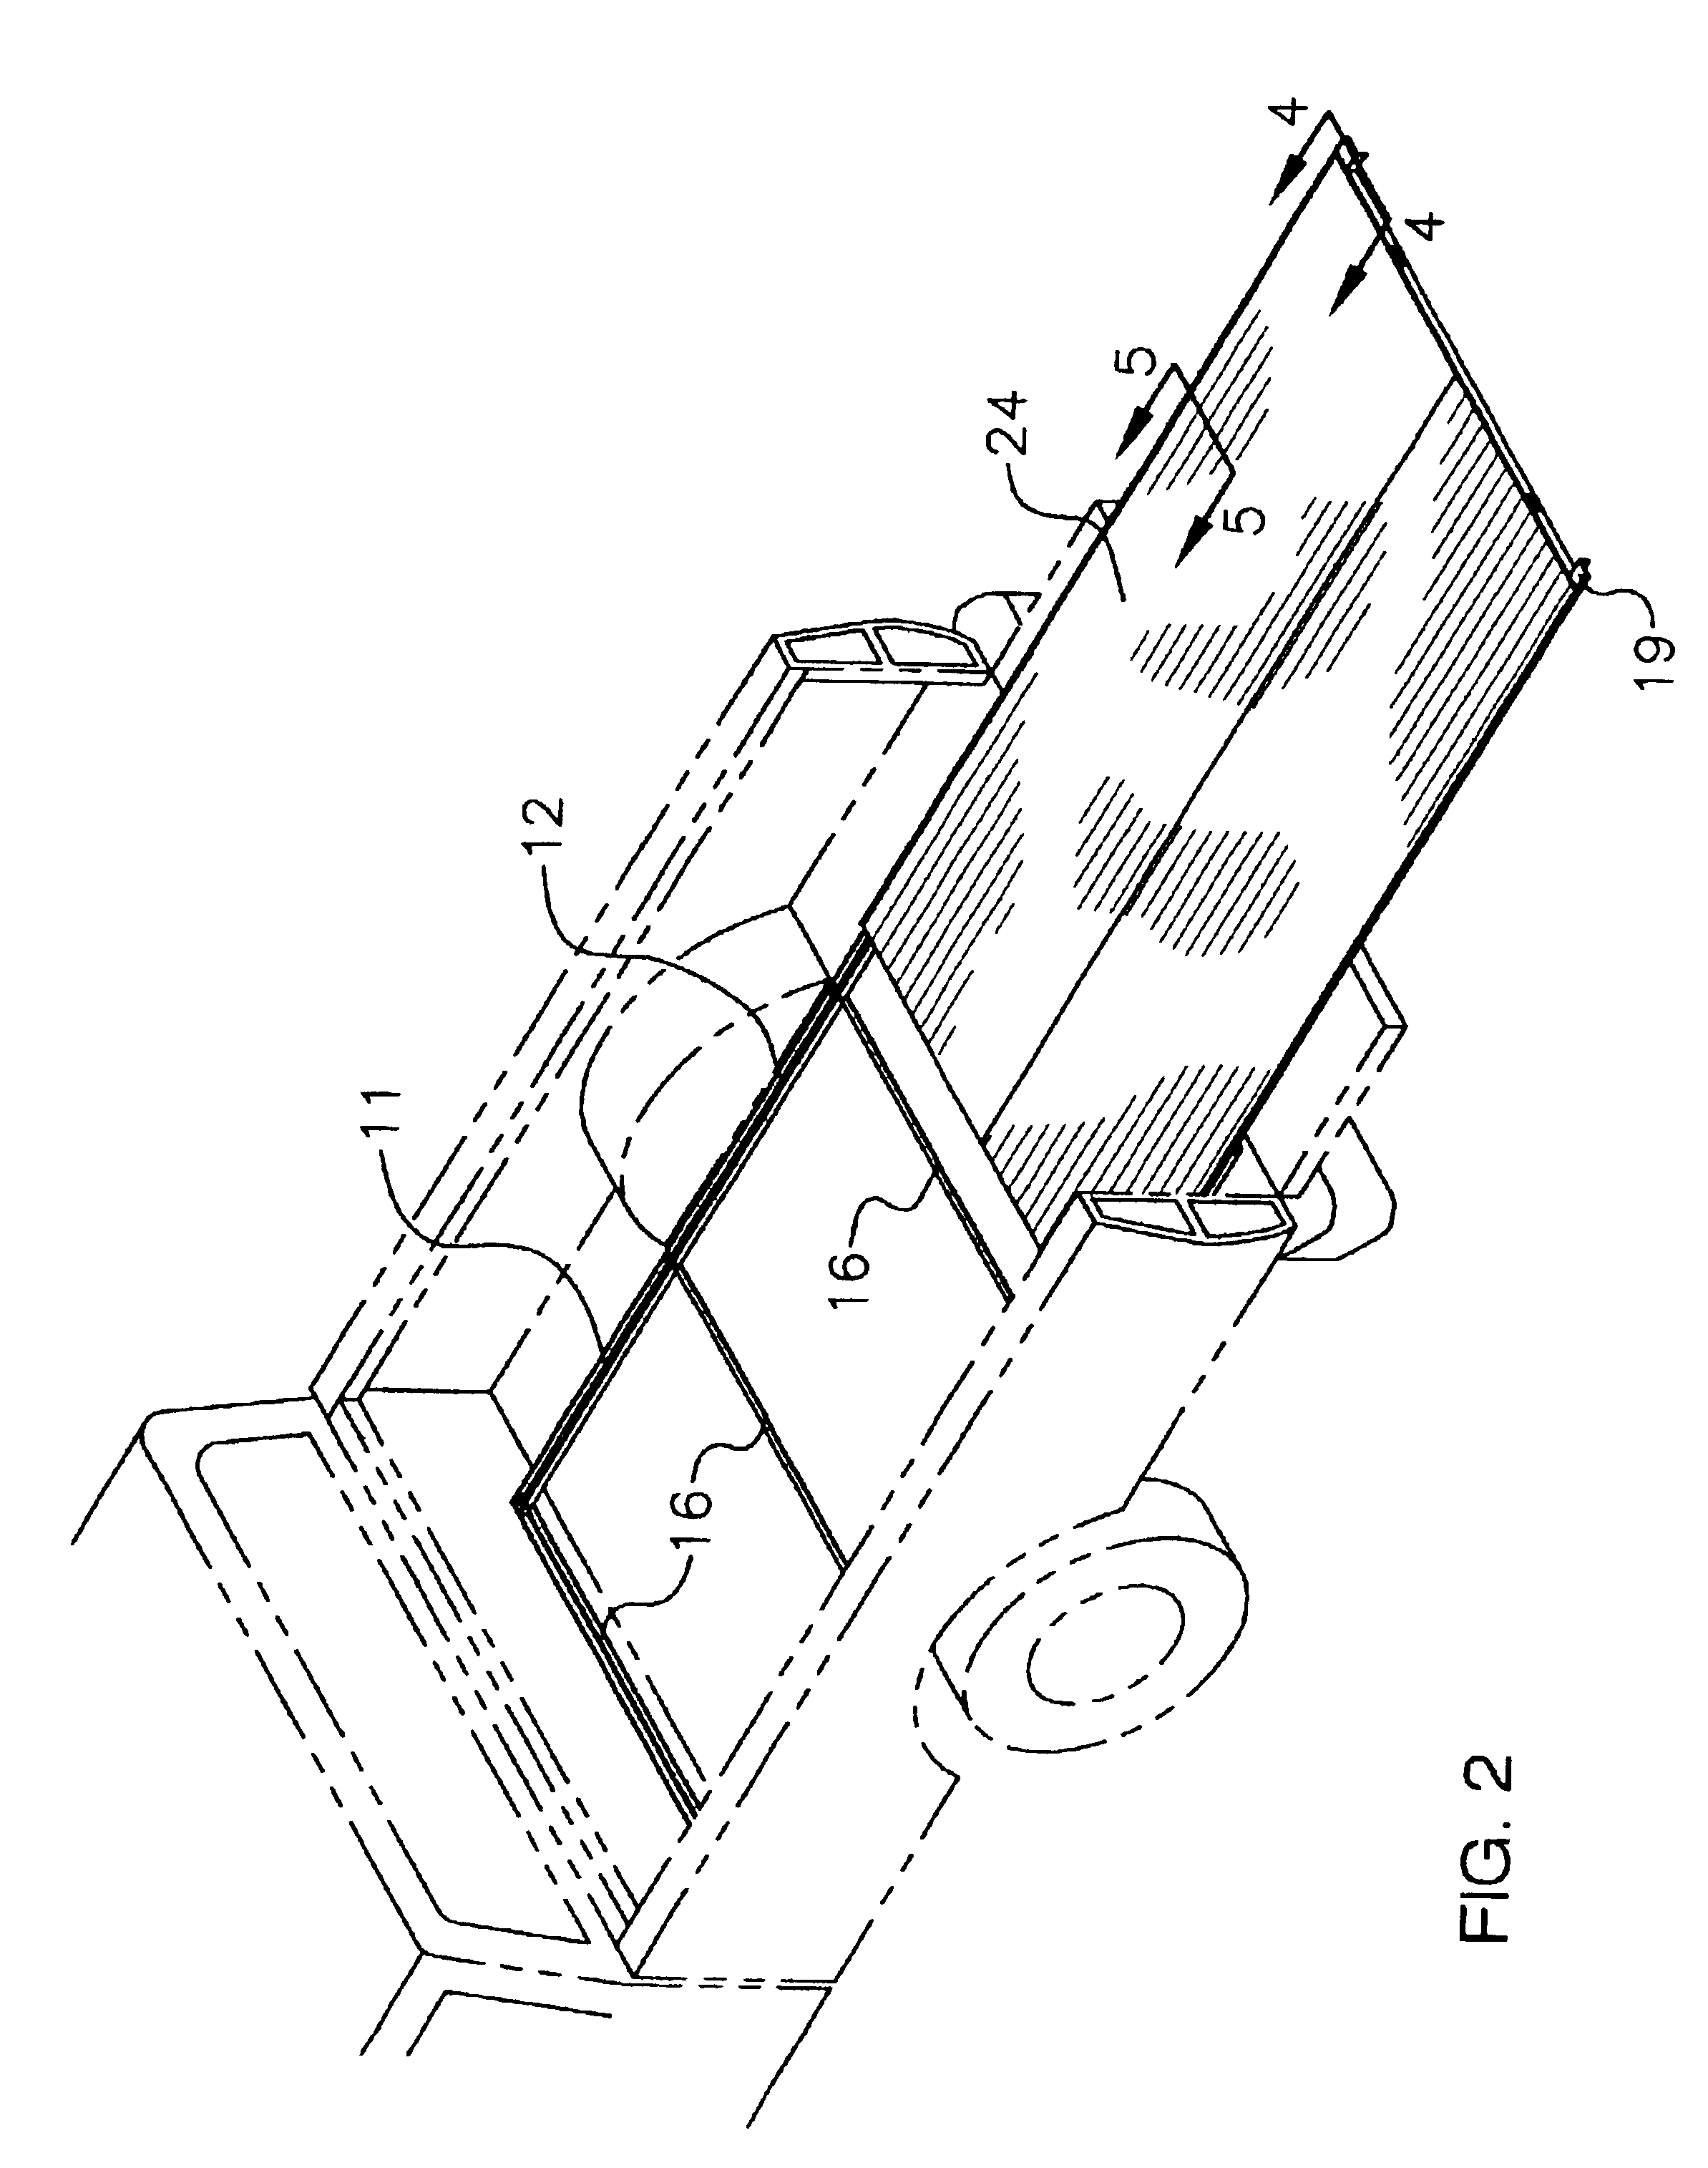 Slidable truck bed-supported cargo carrier assembly